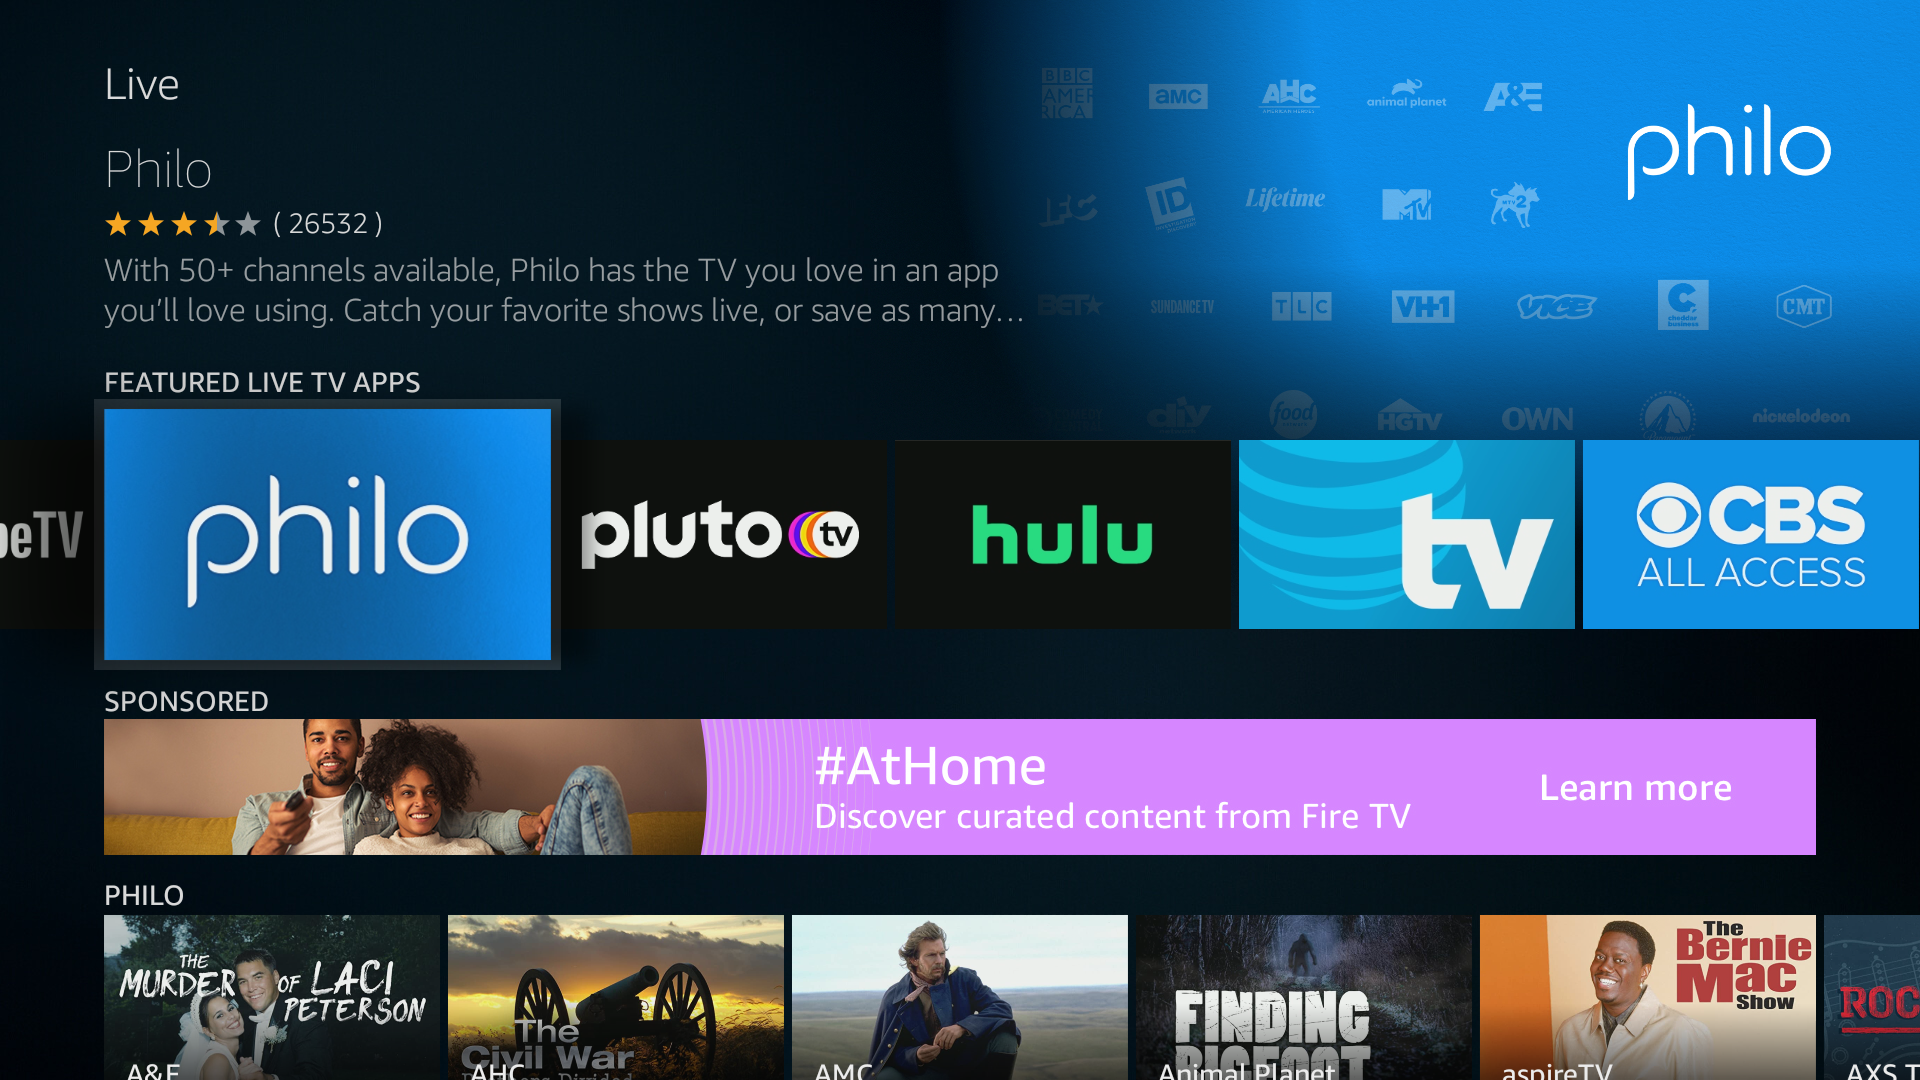 'Philo App featured in the Live TV Tab on Amazon Fire TV stick.'